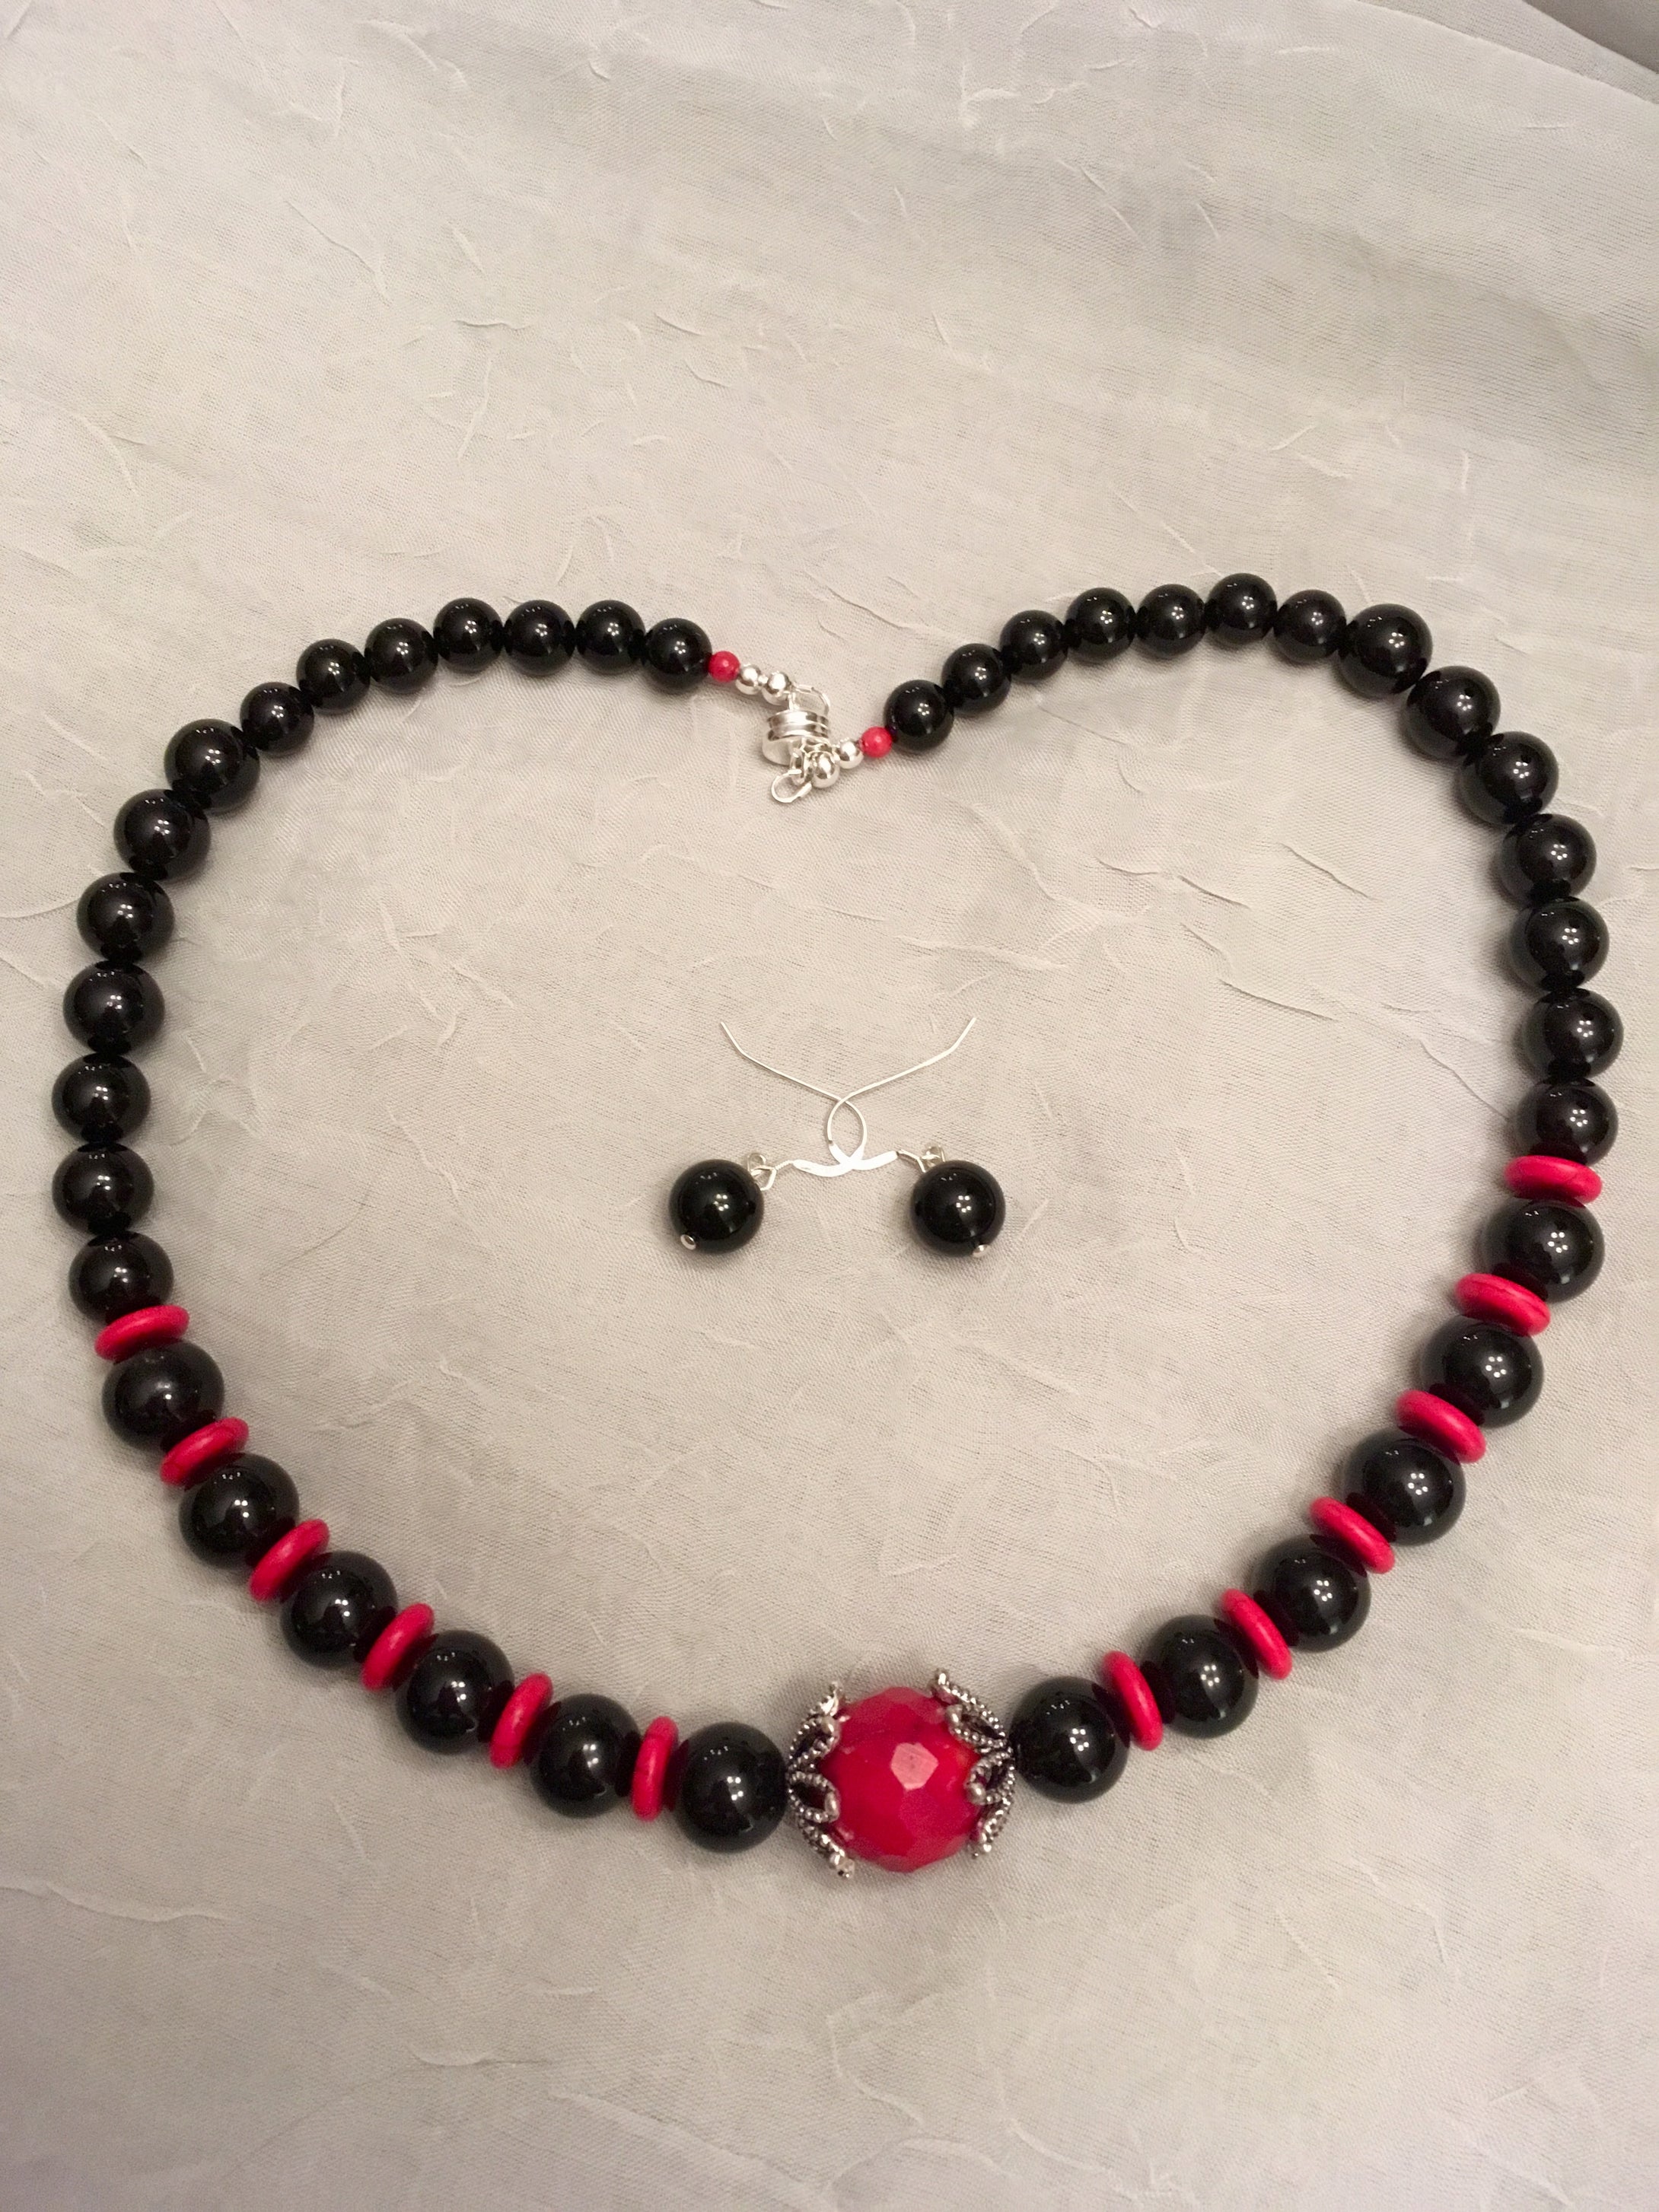 Graduated Black Onyx, Coral, Plated Silver.  19 1/2